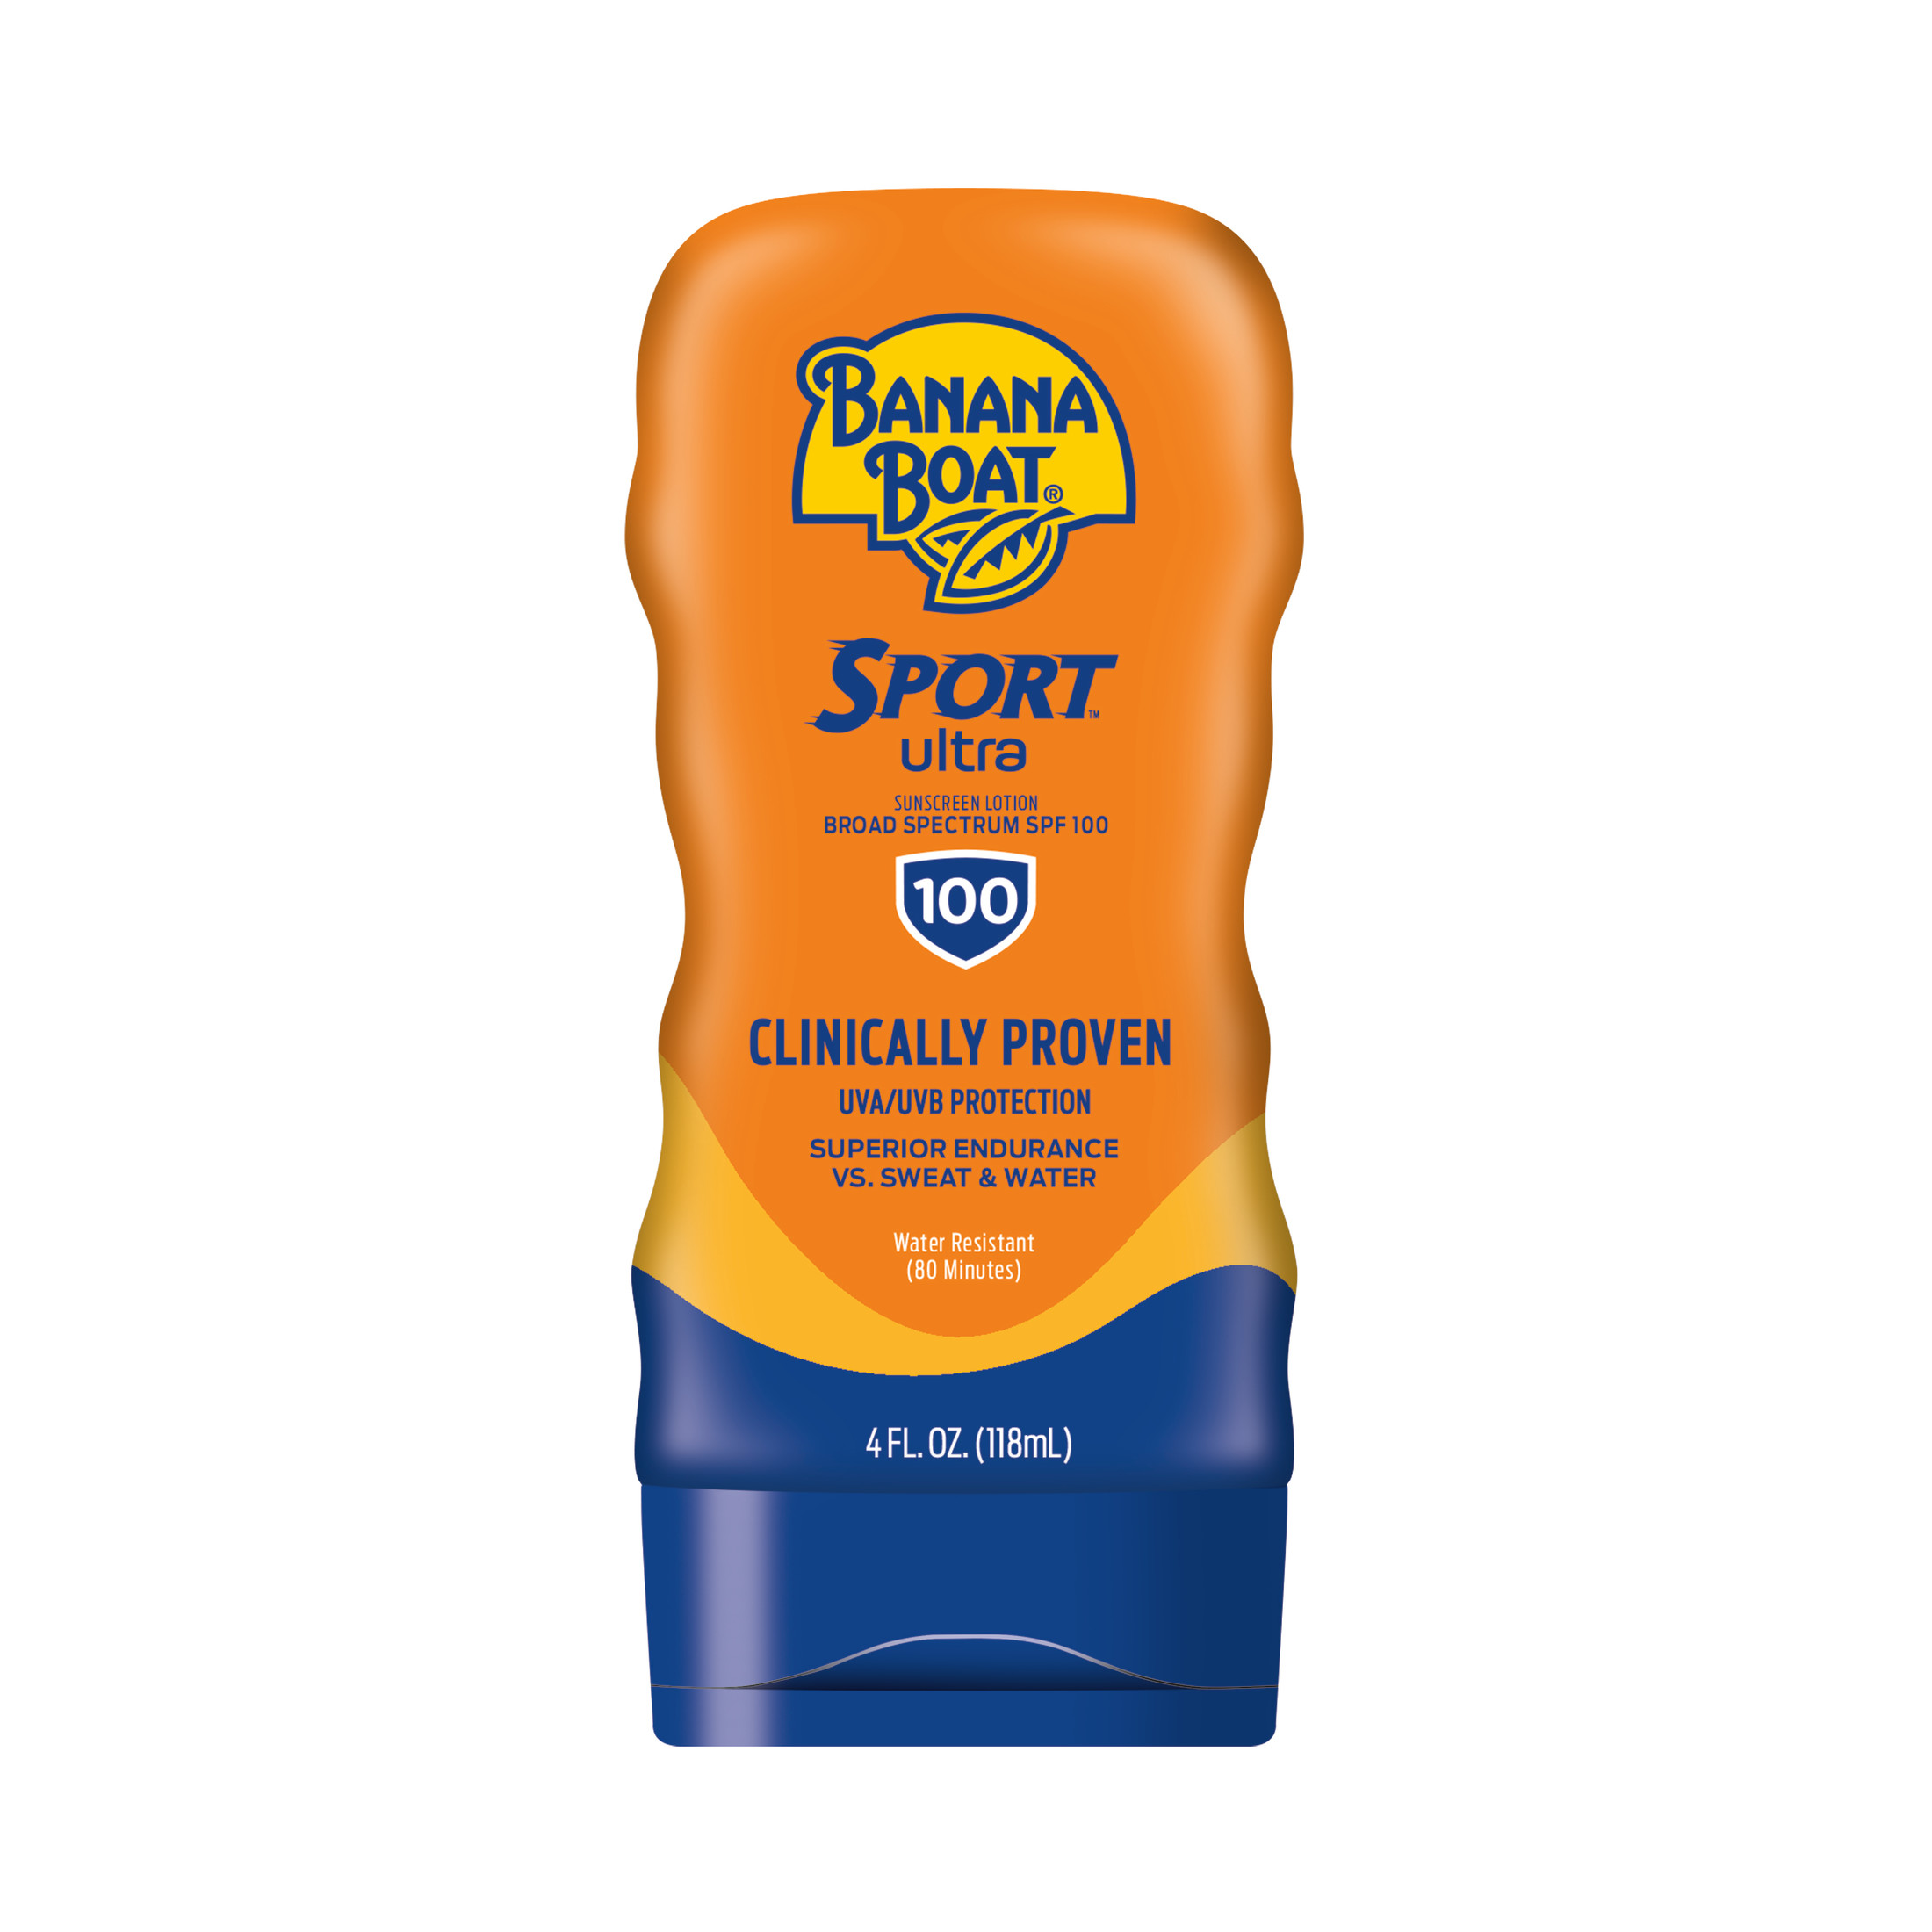 Banana Boat Sport Ultra 100 SPF Sunscreen Lotion, 4oz, Water Resistant (80 Minutes) Adult Sun Block - image 2 of 9